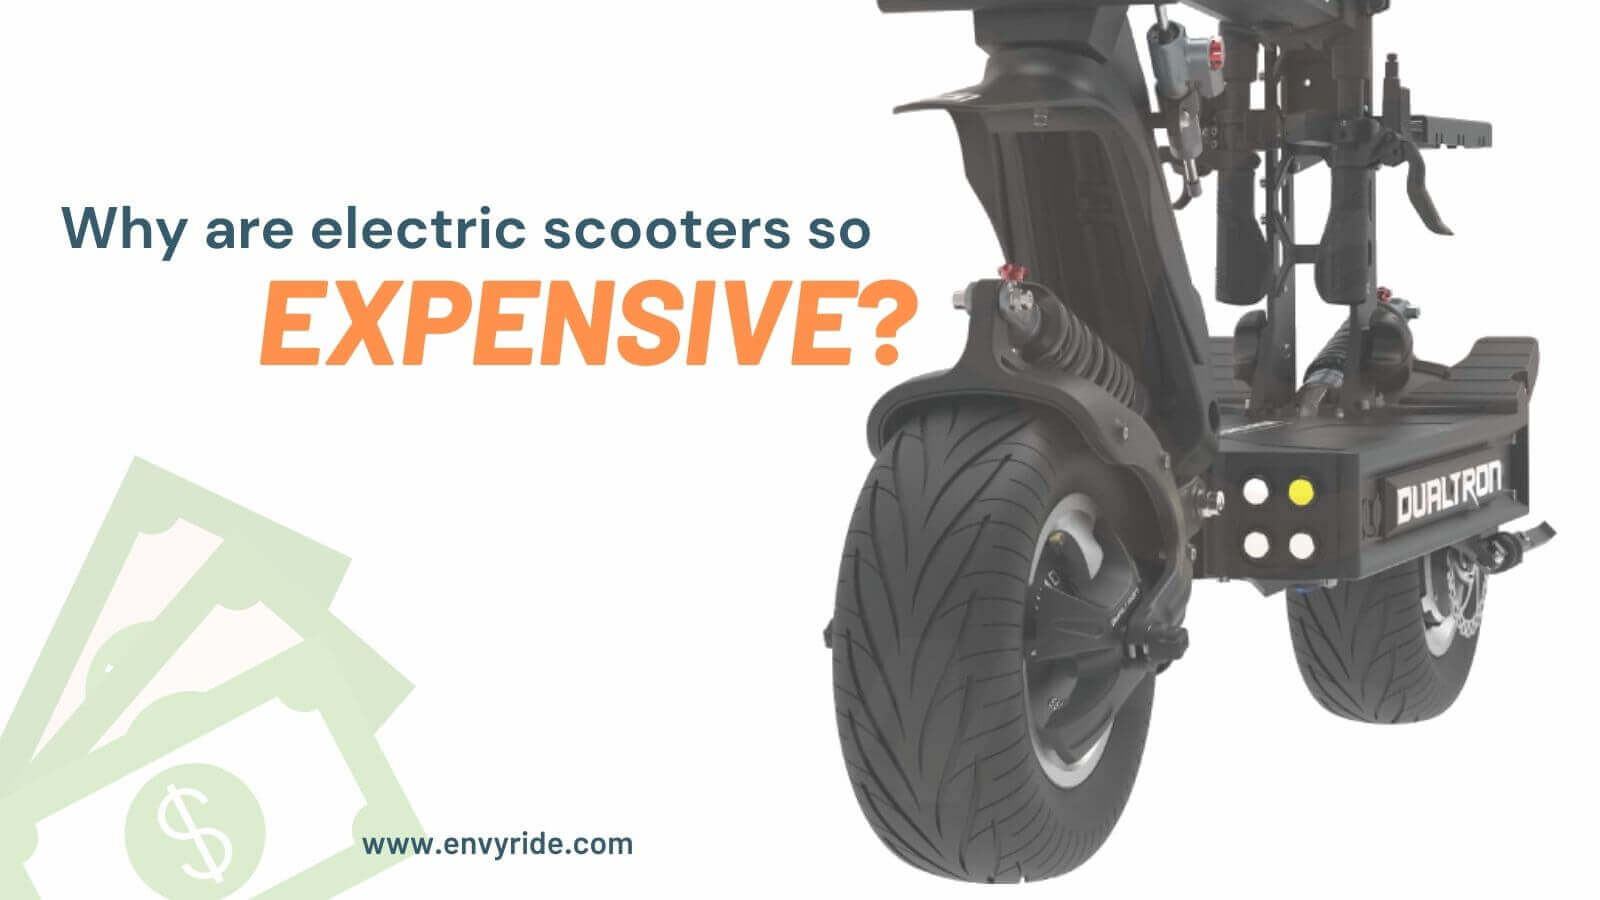 electric scooter - expensive